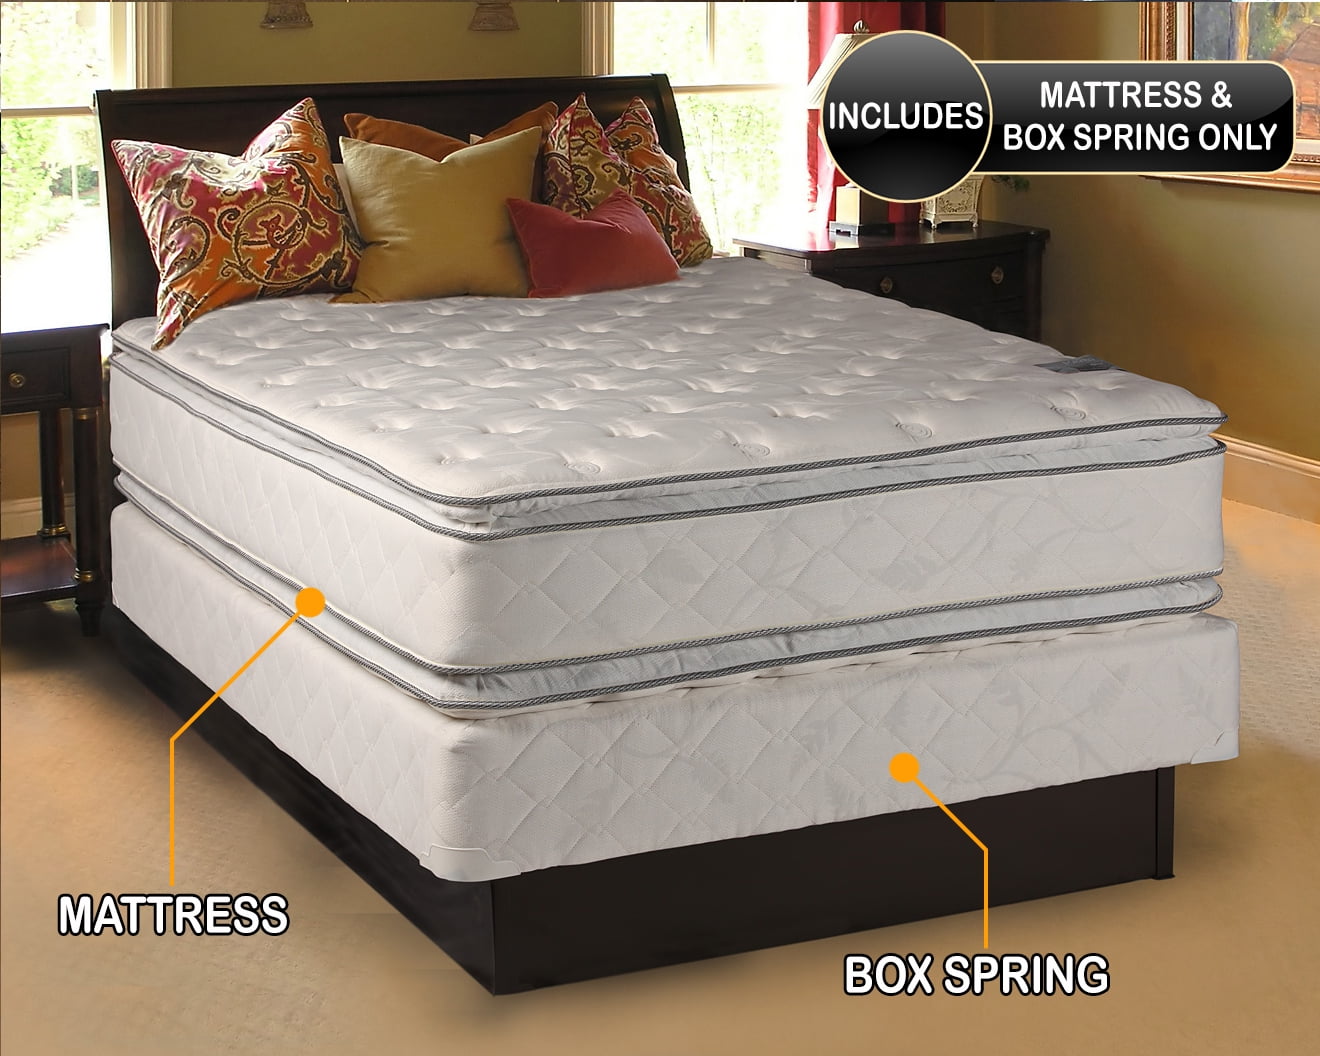 Serenity Pillow Top - (King Size) Medium Soft Mattress and Spring Set Double-Sided Sleep System with Enhanced Cushion Support- Fully Assembled, Back Support, Dream Solutions USA - Walmart.com